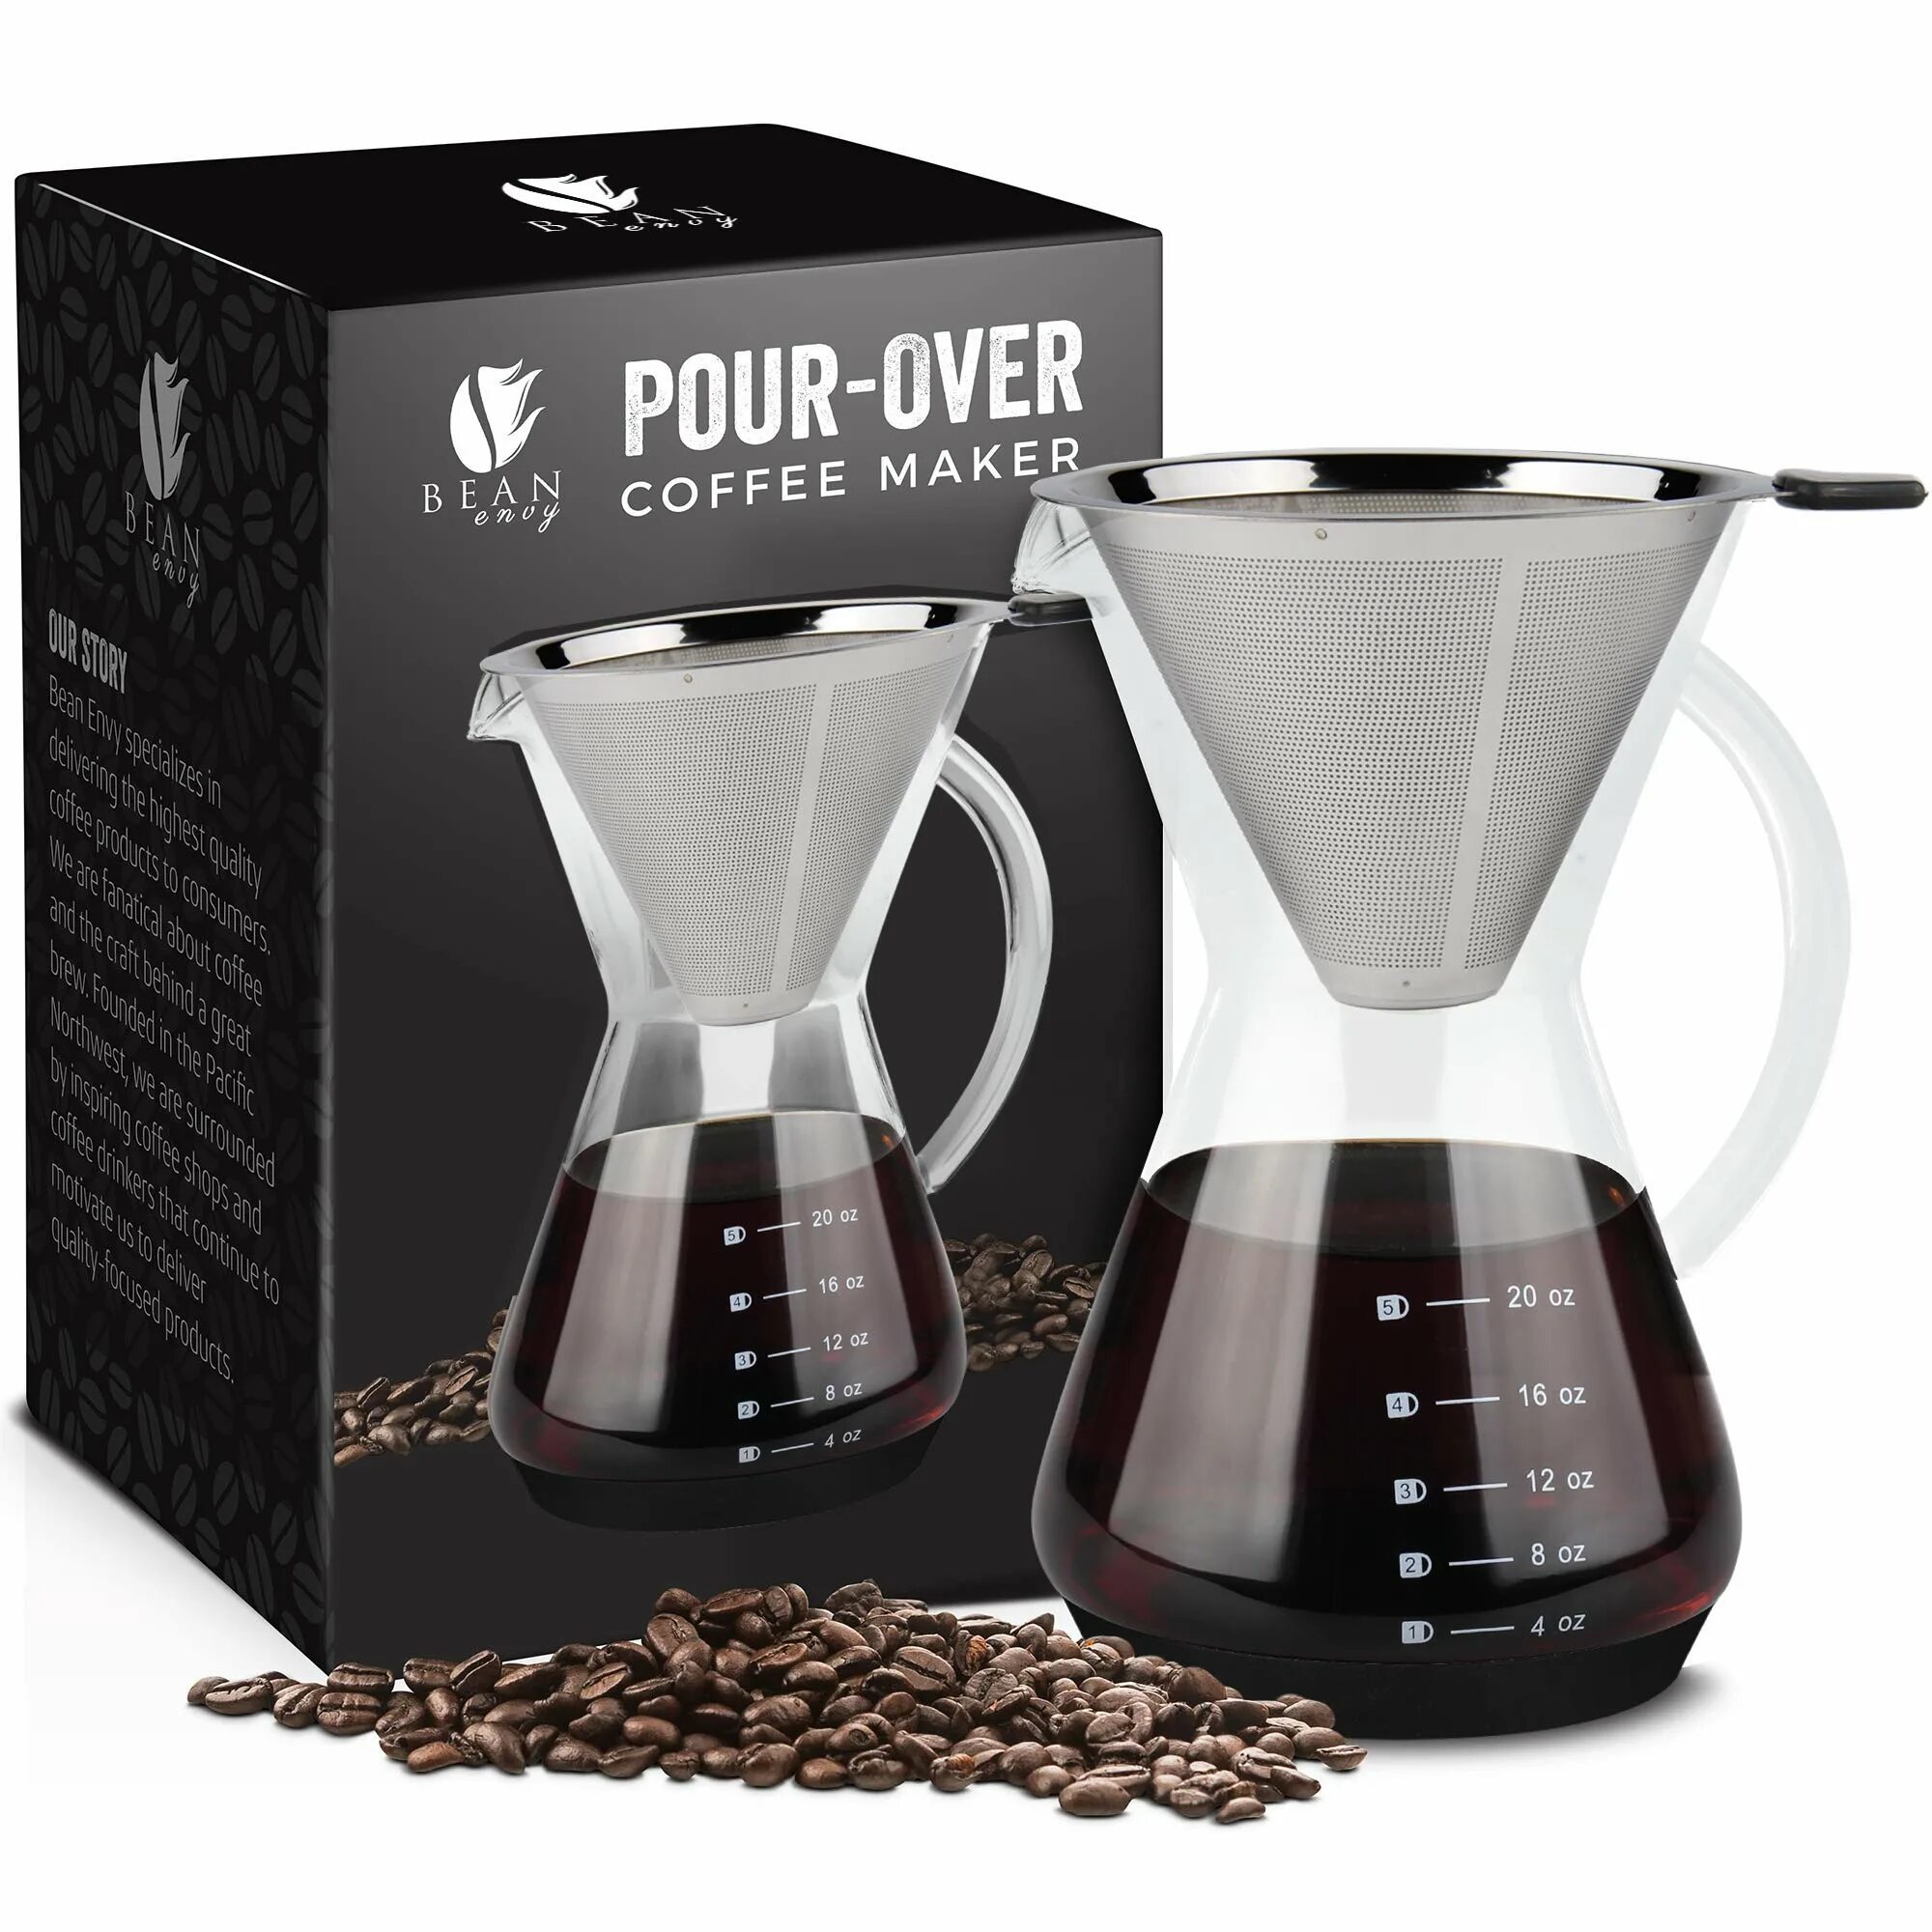 Pour over Coffee. Pour over Coffee maker. Двустенный pour over кофе. Pour over Coffee Brewing.